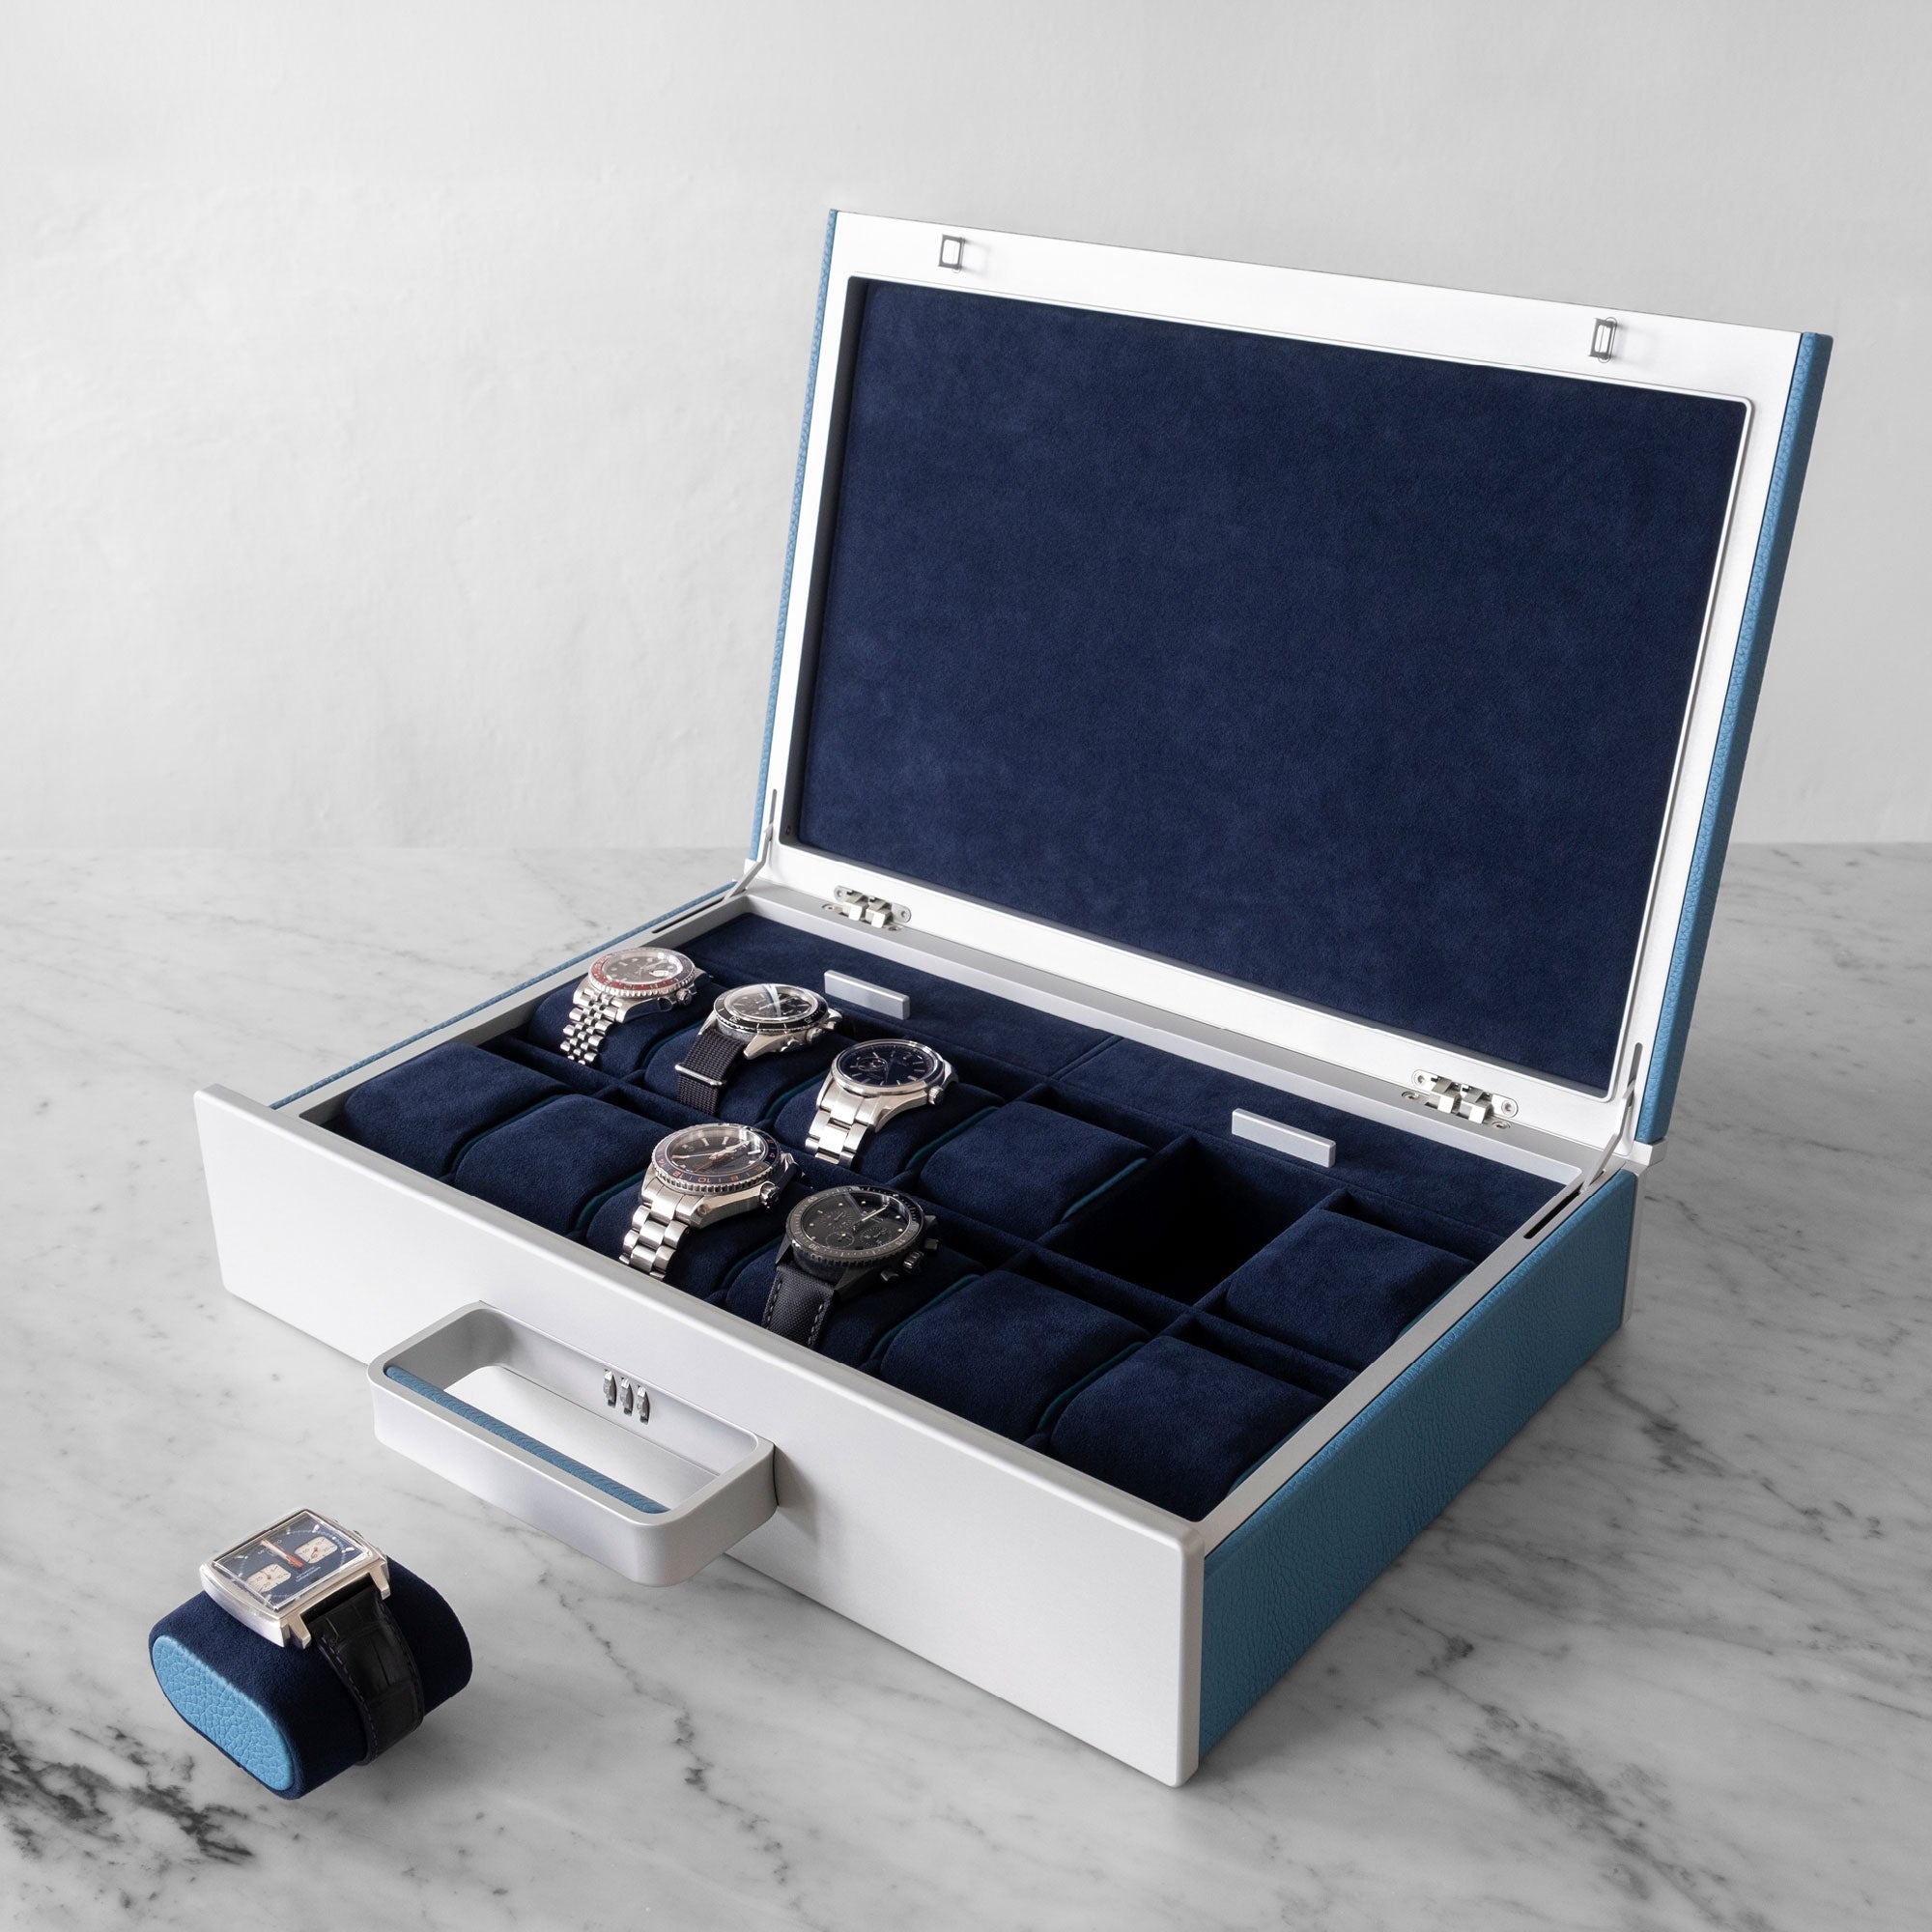 Designer Watch briefcase for 12 watches in sky blue leather, carbon fiber and grey anodized aluminum and deep blue Alcantara interior with luxury watches including Tag Heuer, Rolex, Blancpain and Omega